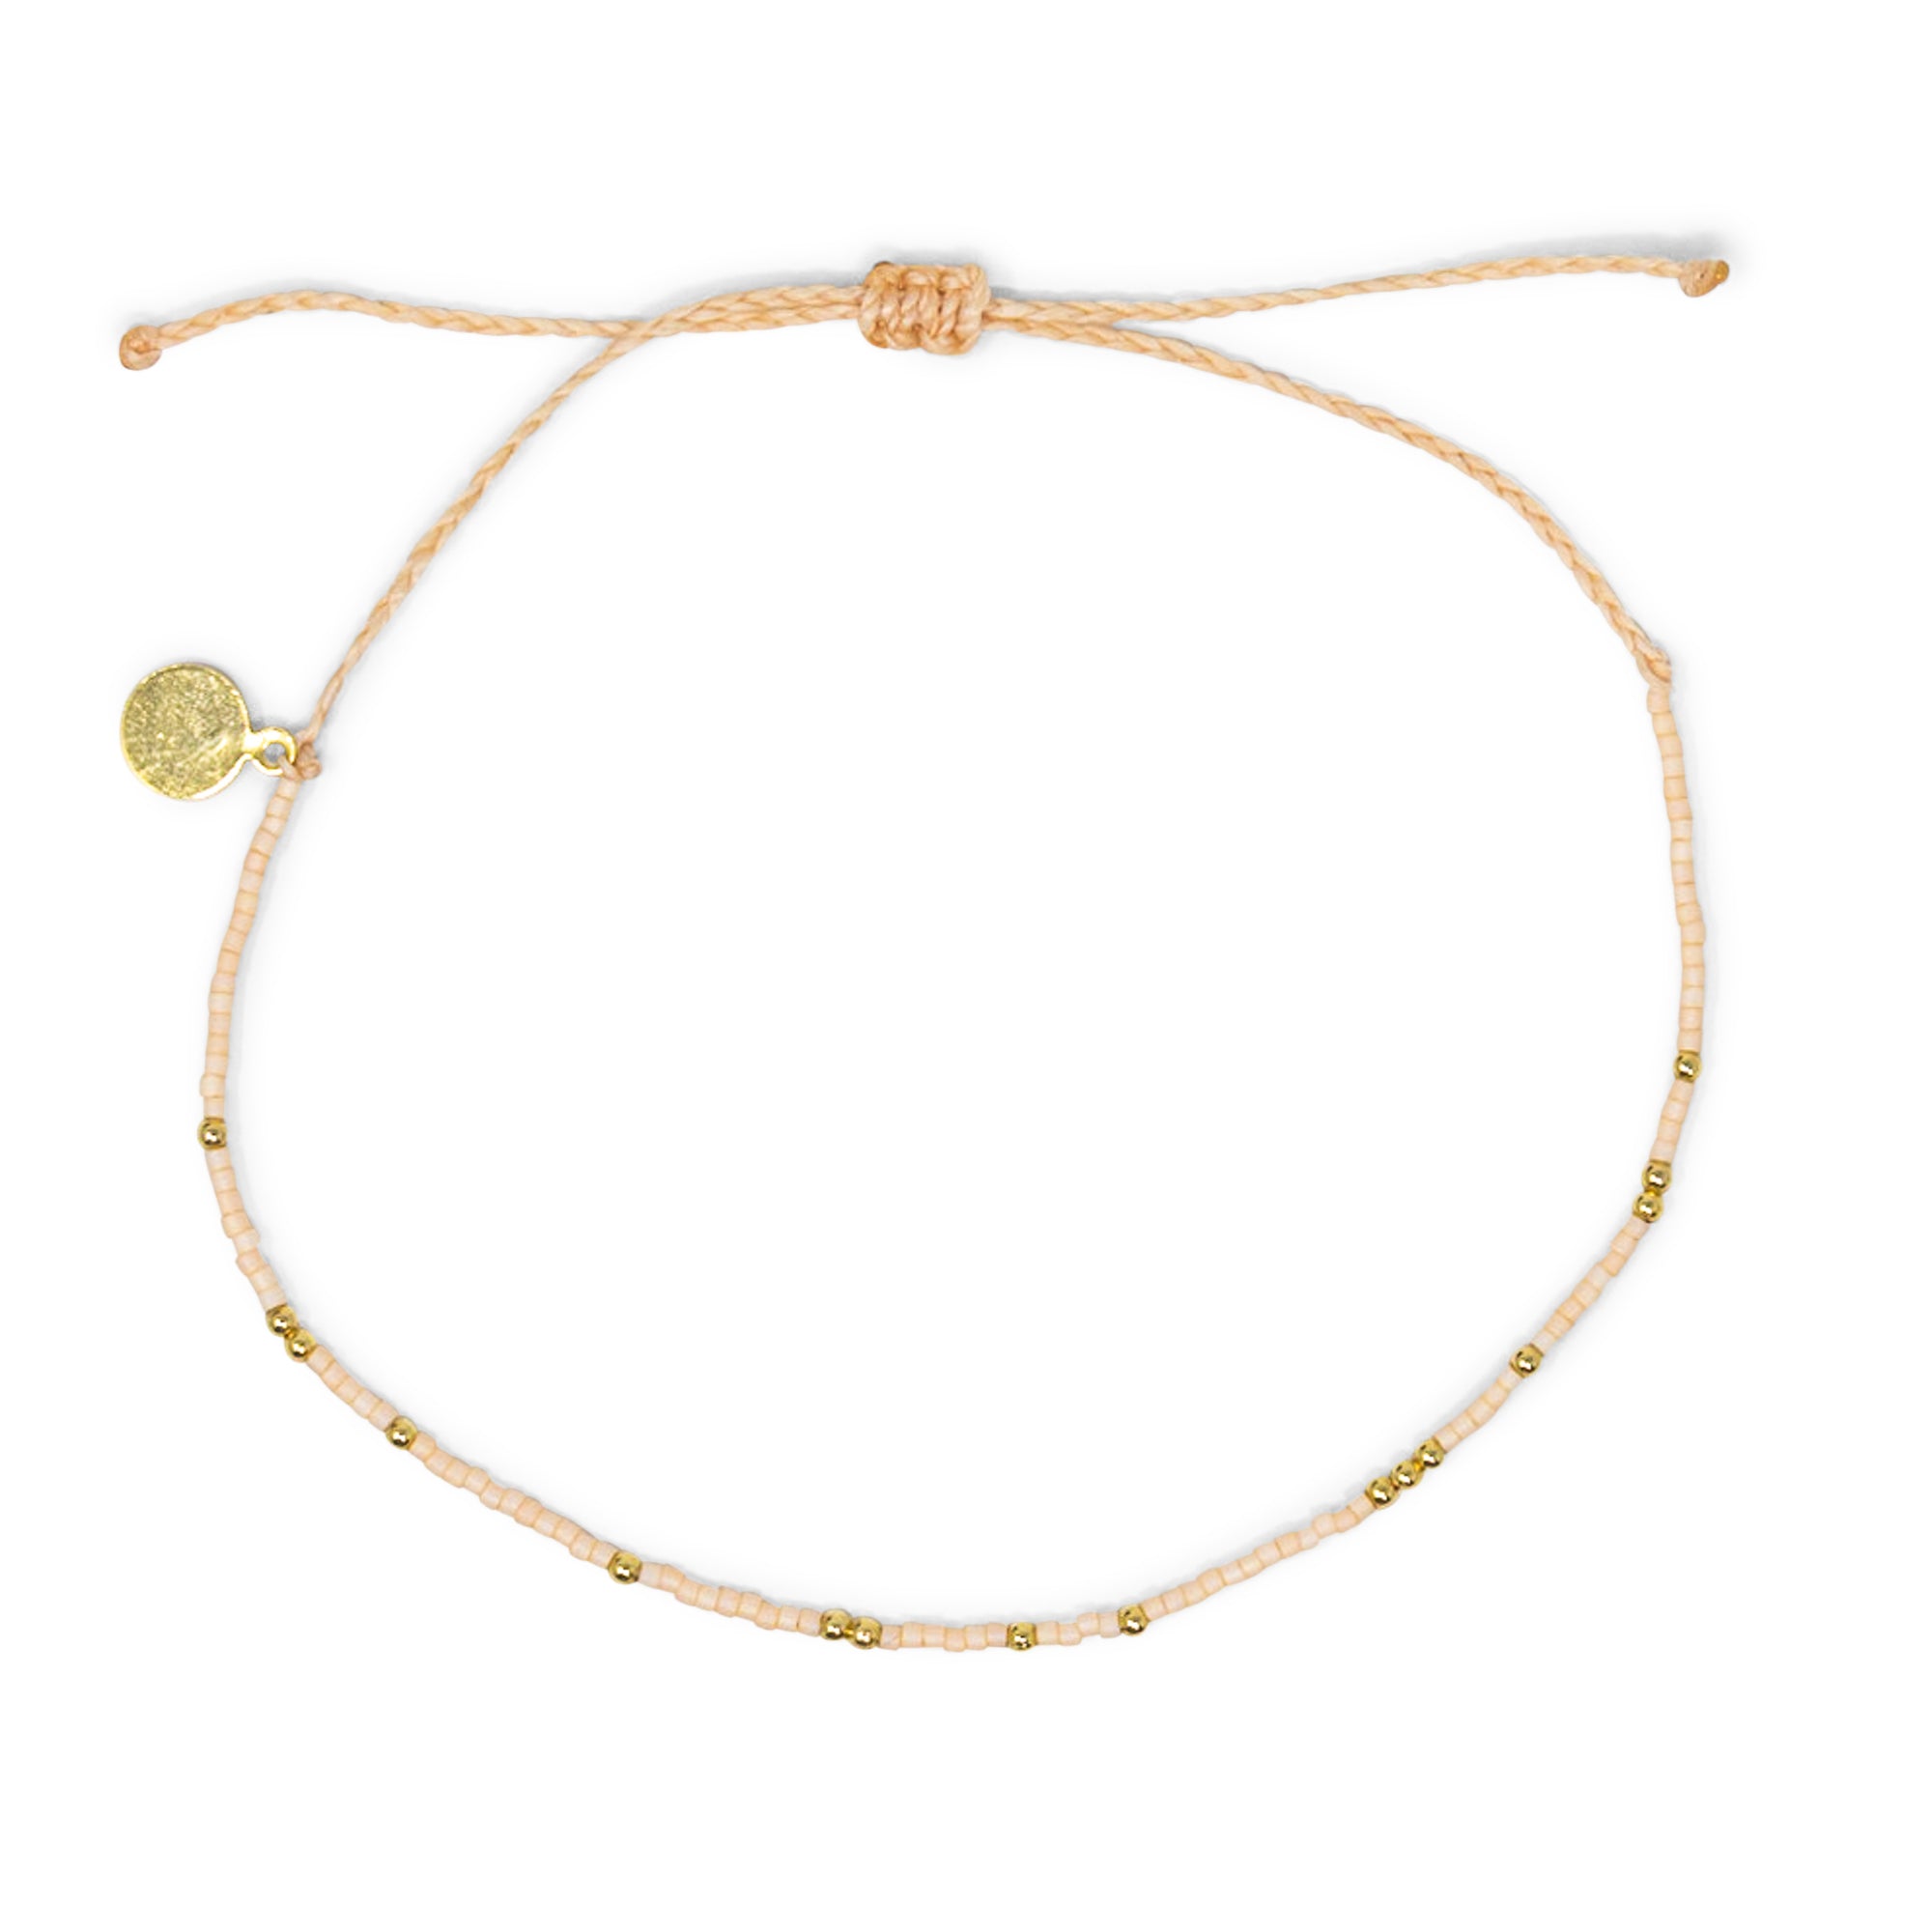 Peachy & Gold Bead Anklet